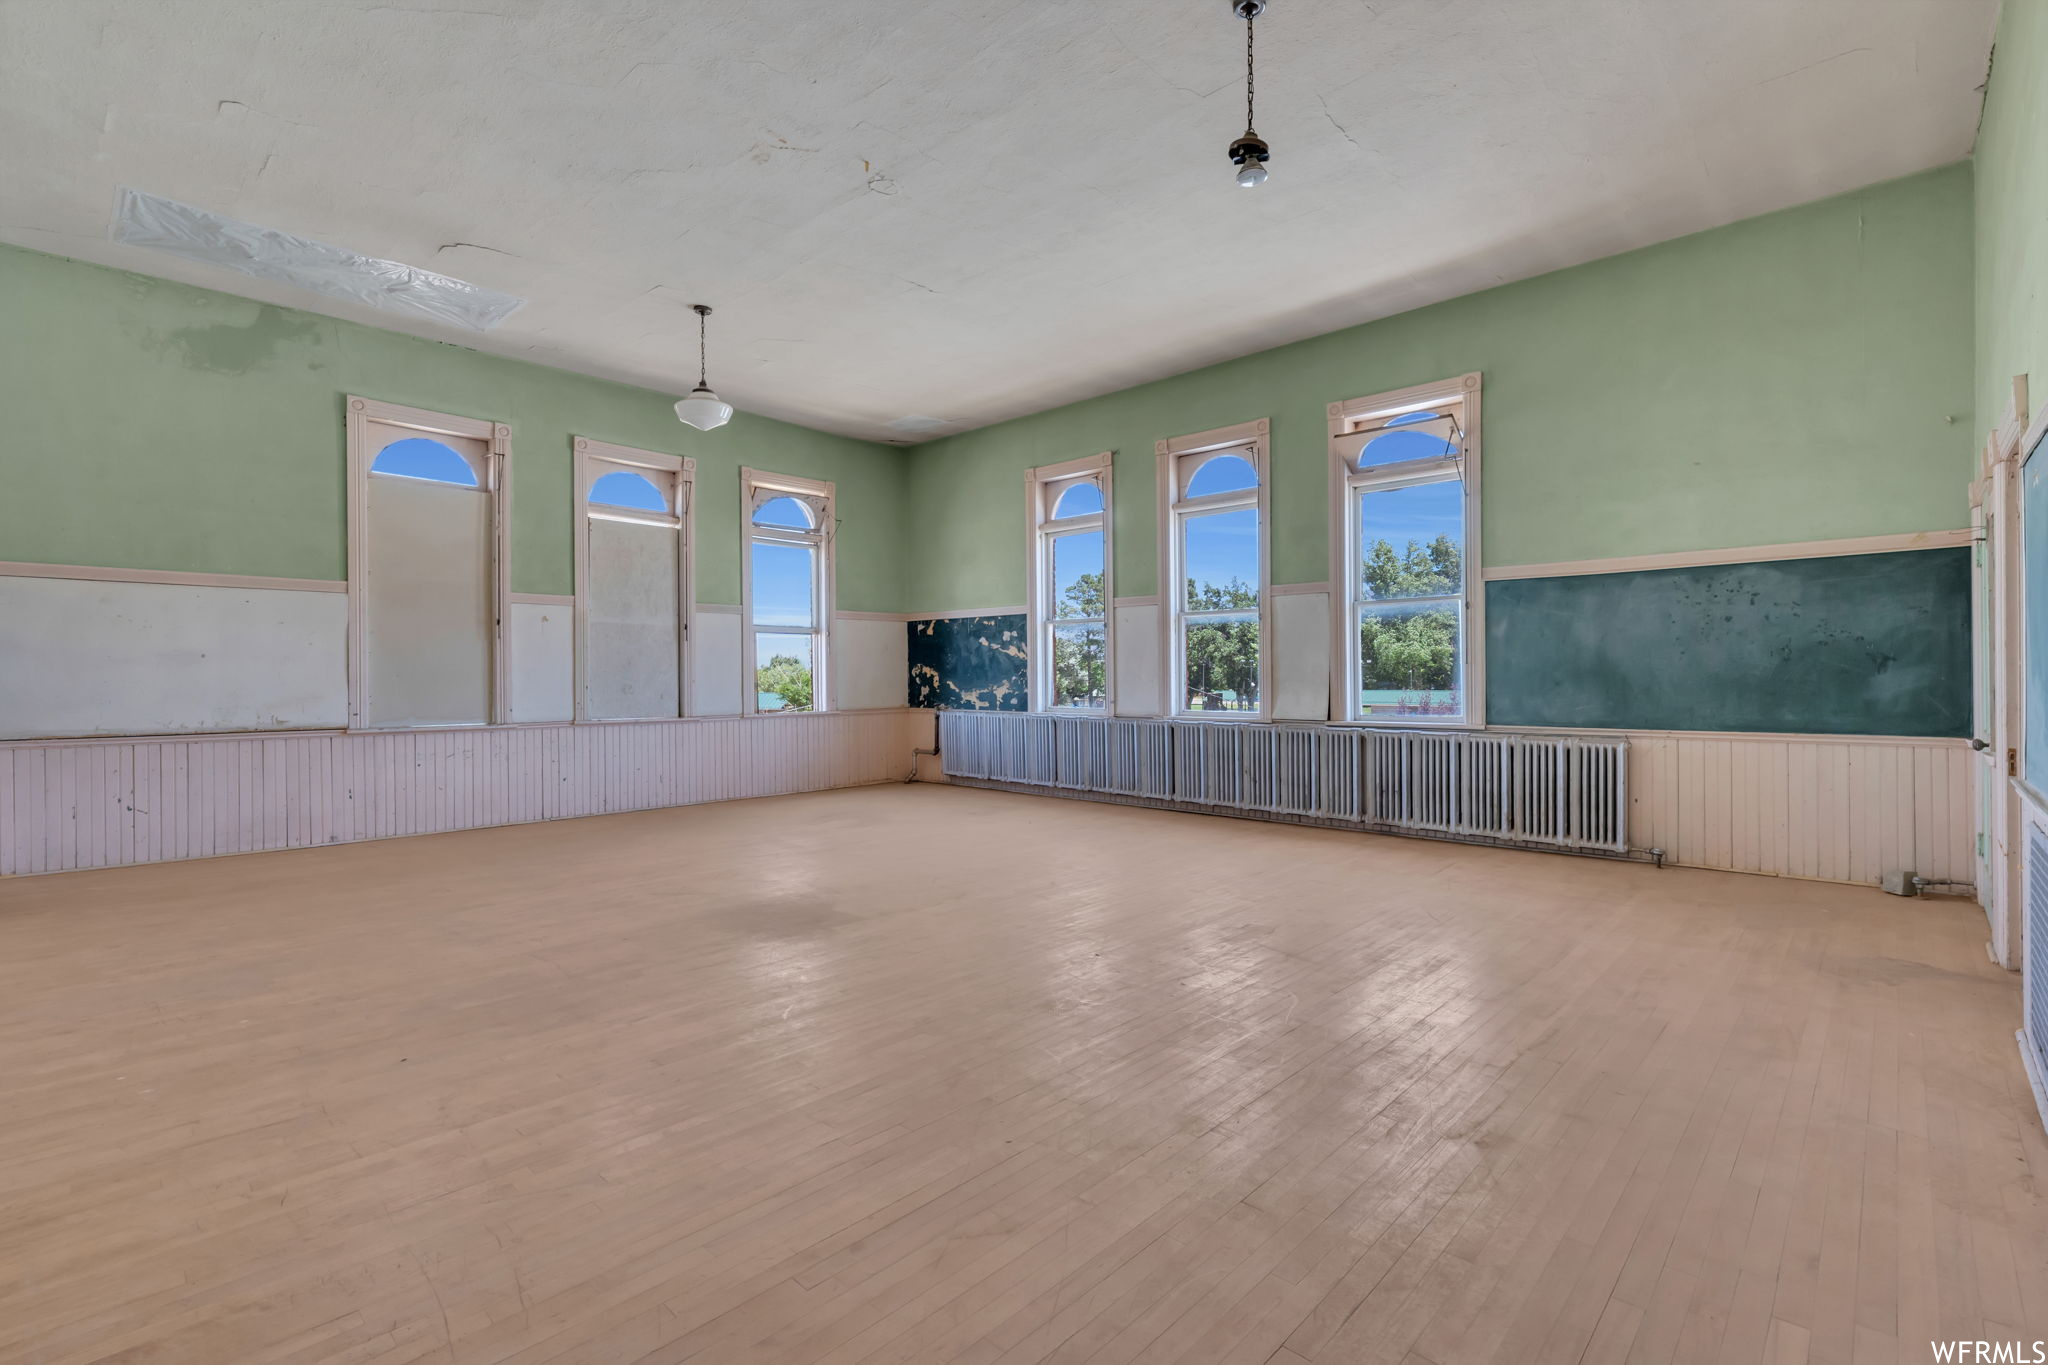 View of wood floored classroom with large windows and chalk board walls